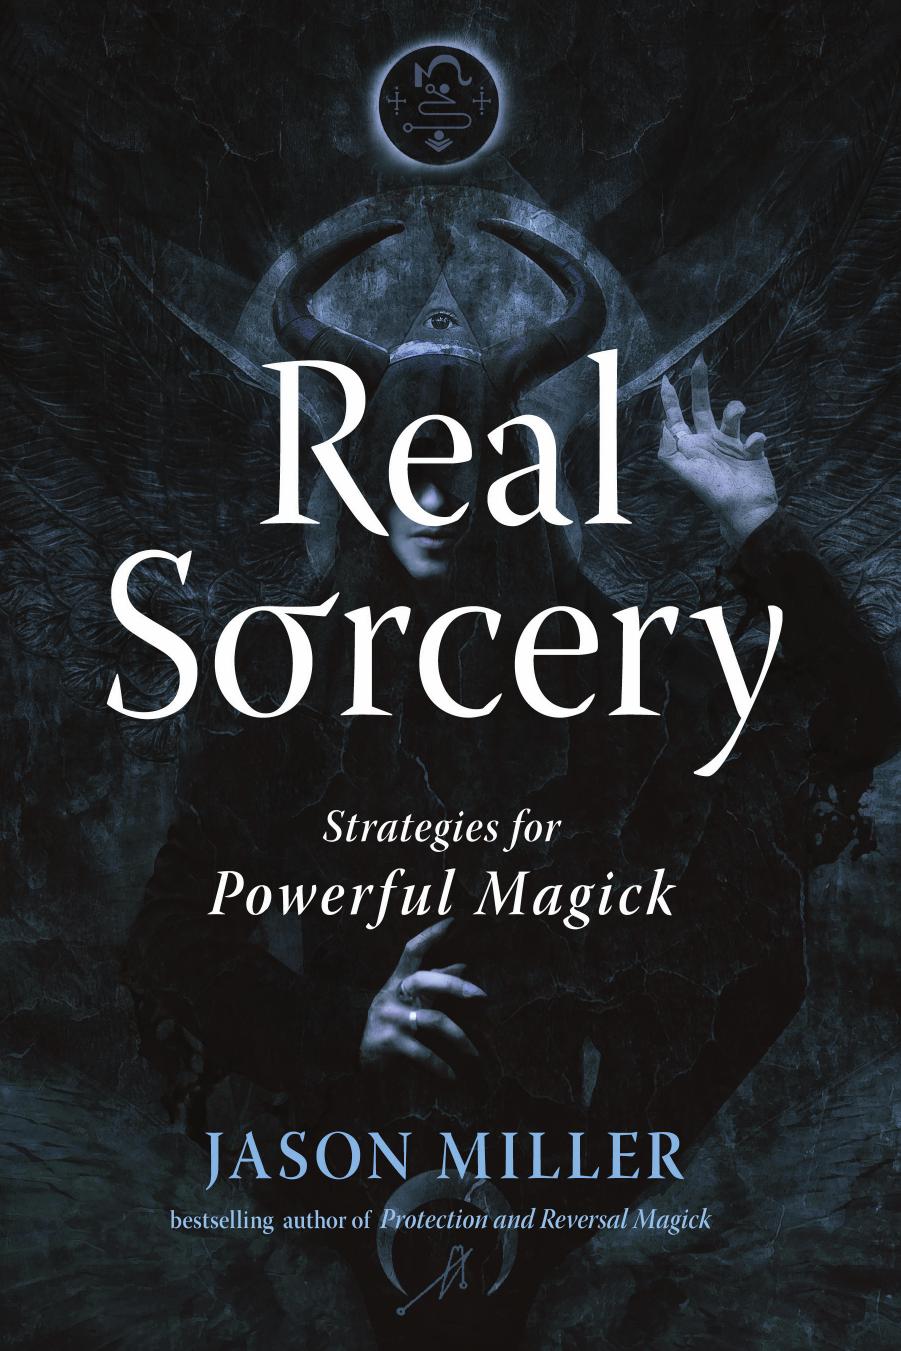 Real Sorcery: Strategies for Powerful Magick (Strategic Sorcery Series) by Jason Miller